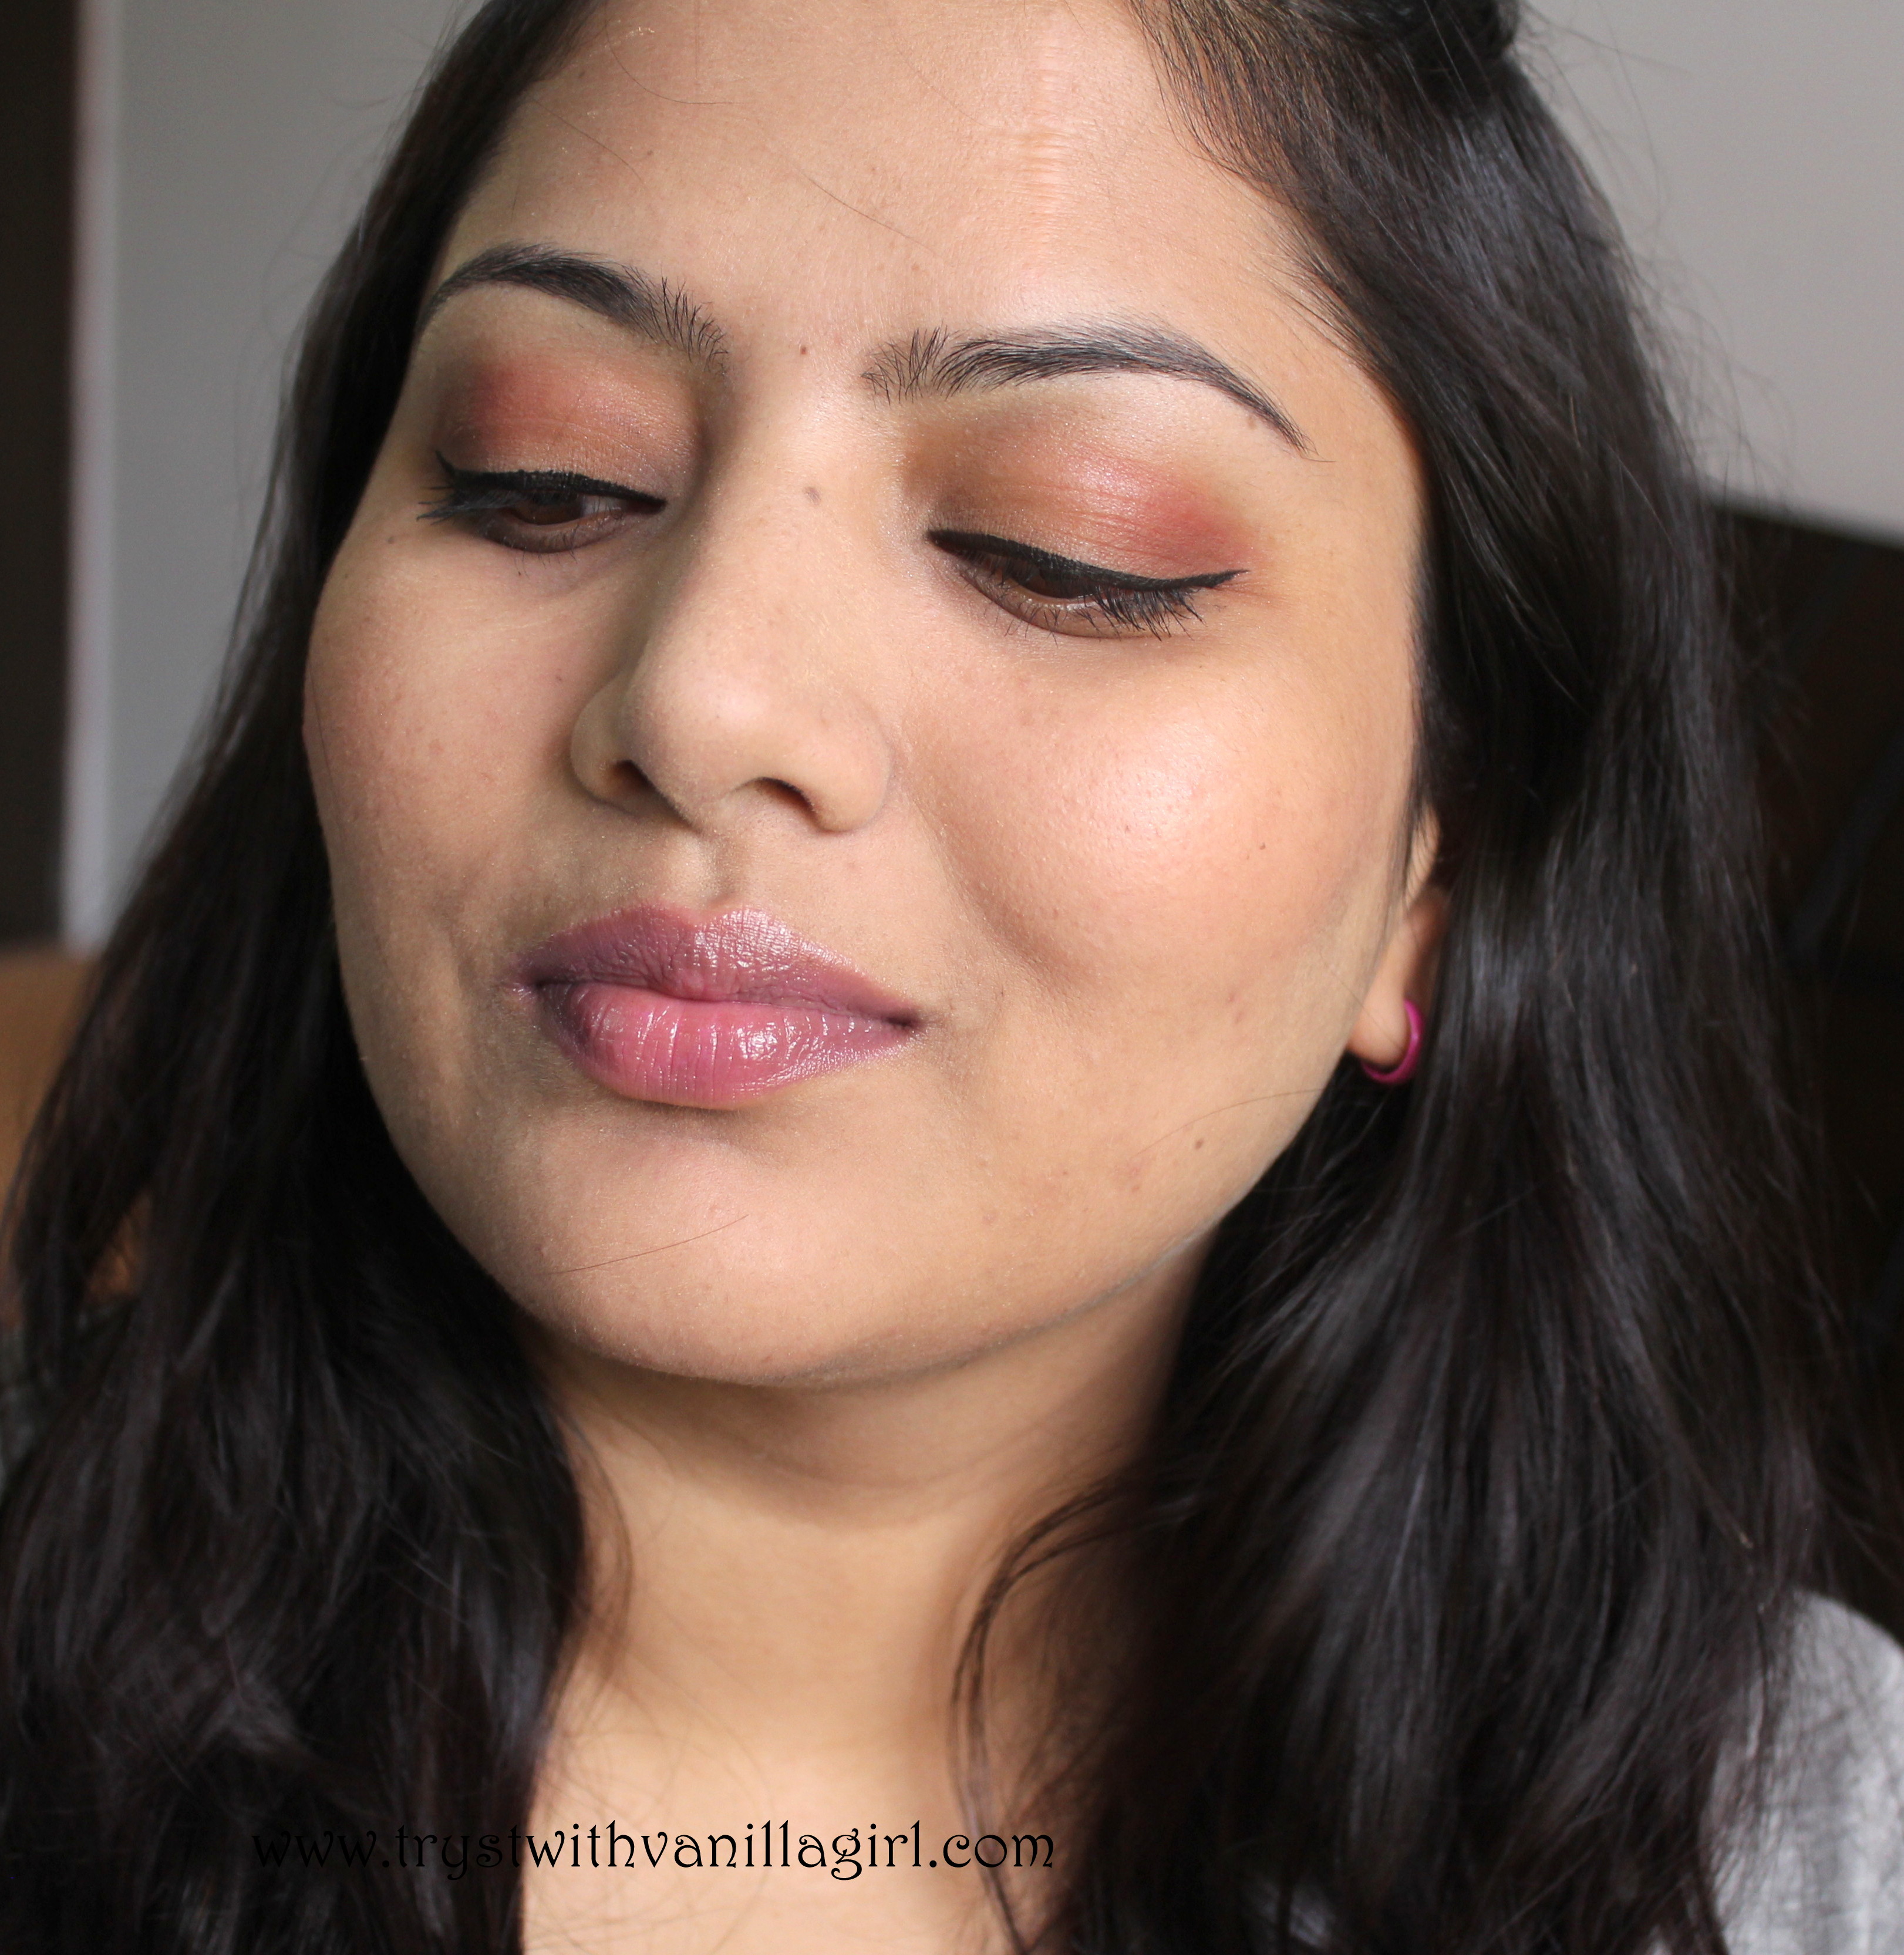 Lakme Lip Love Lip Care Strawberry Review, Swatch, Photos